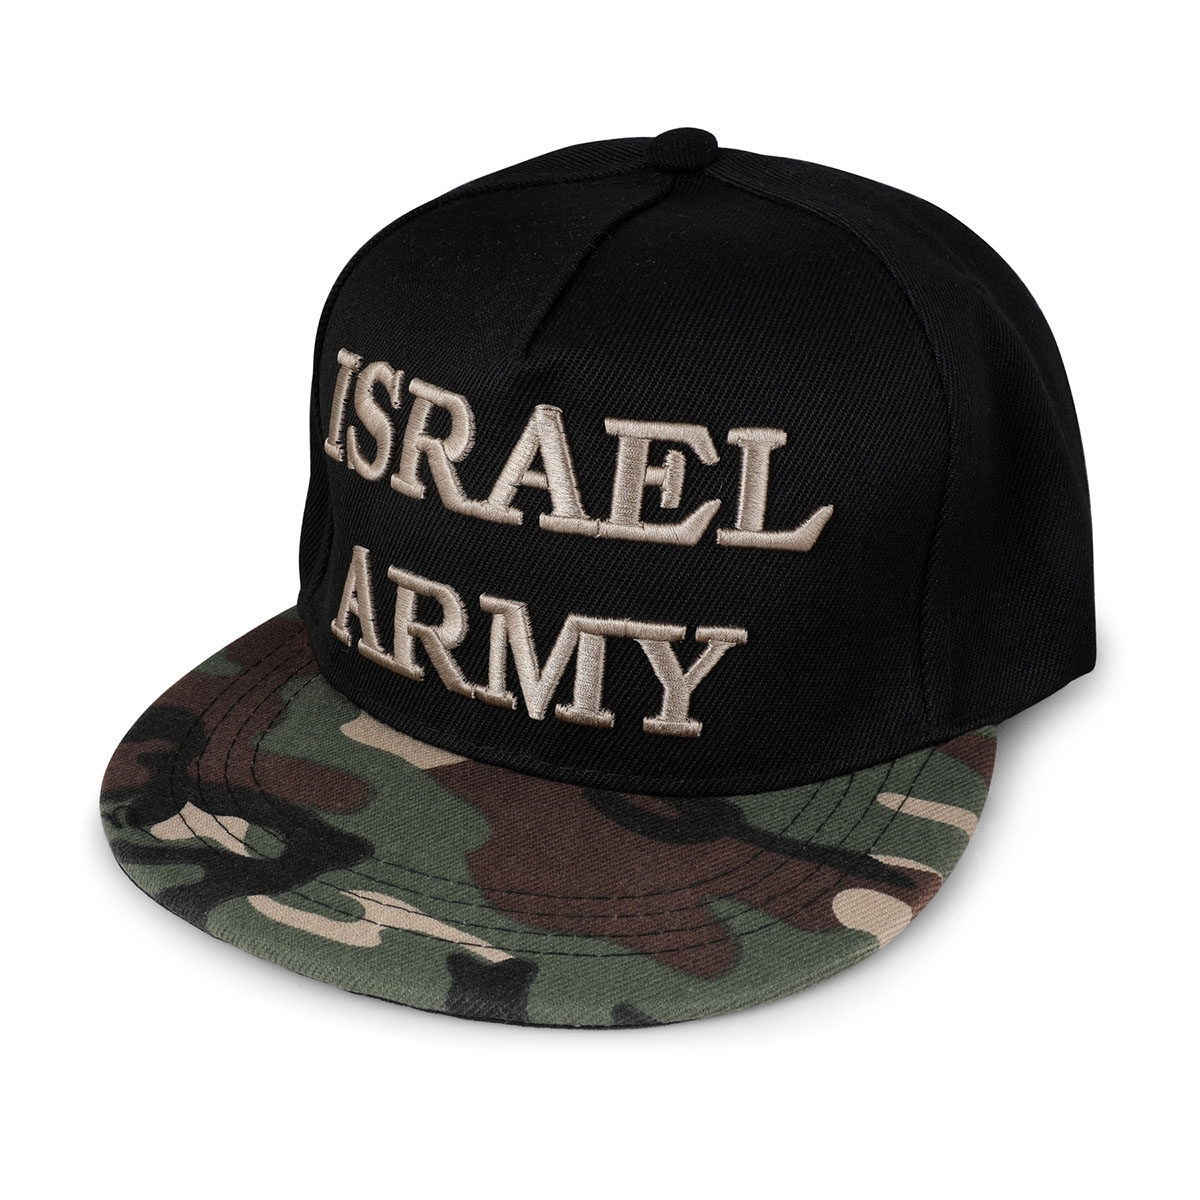 Black "Israel Army" Sports Cap - with Camouflage Bill - 1